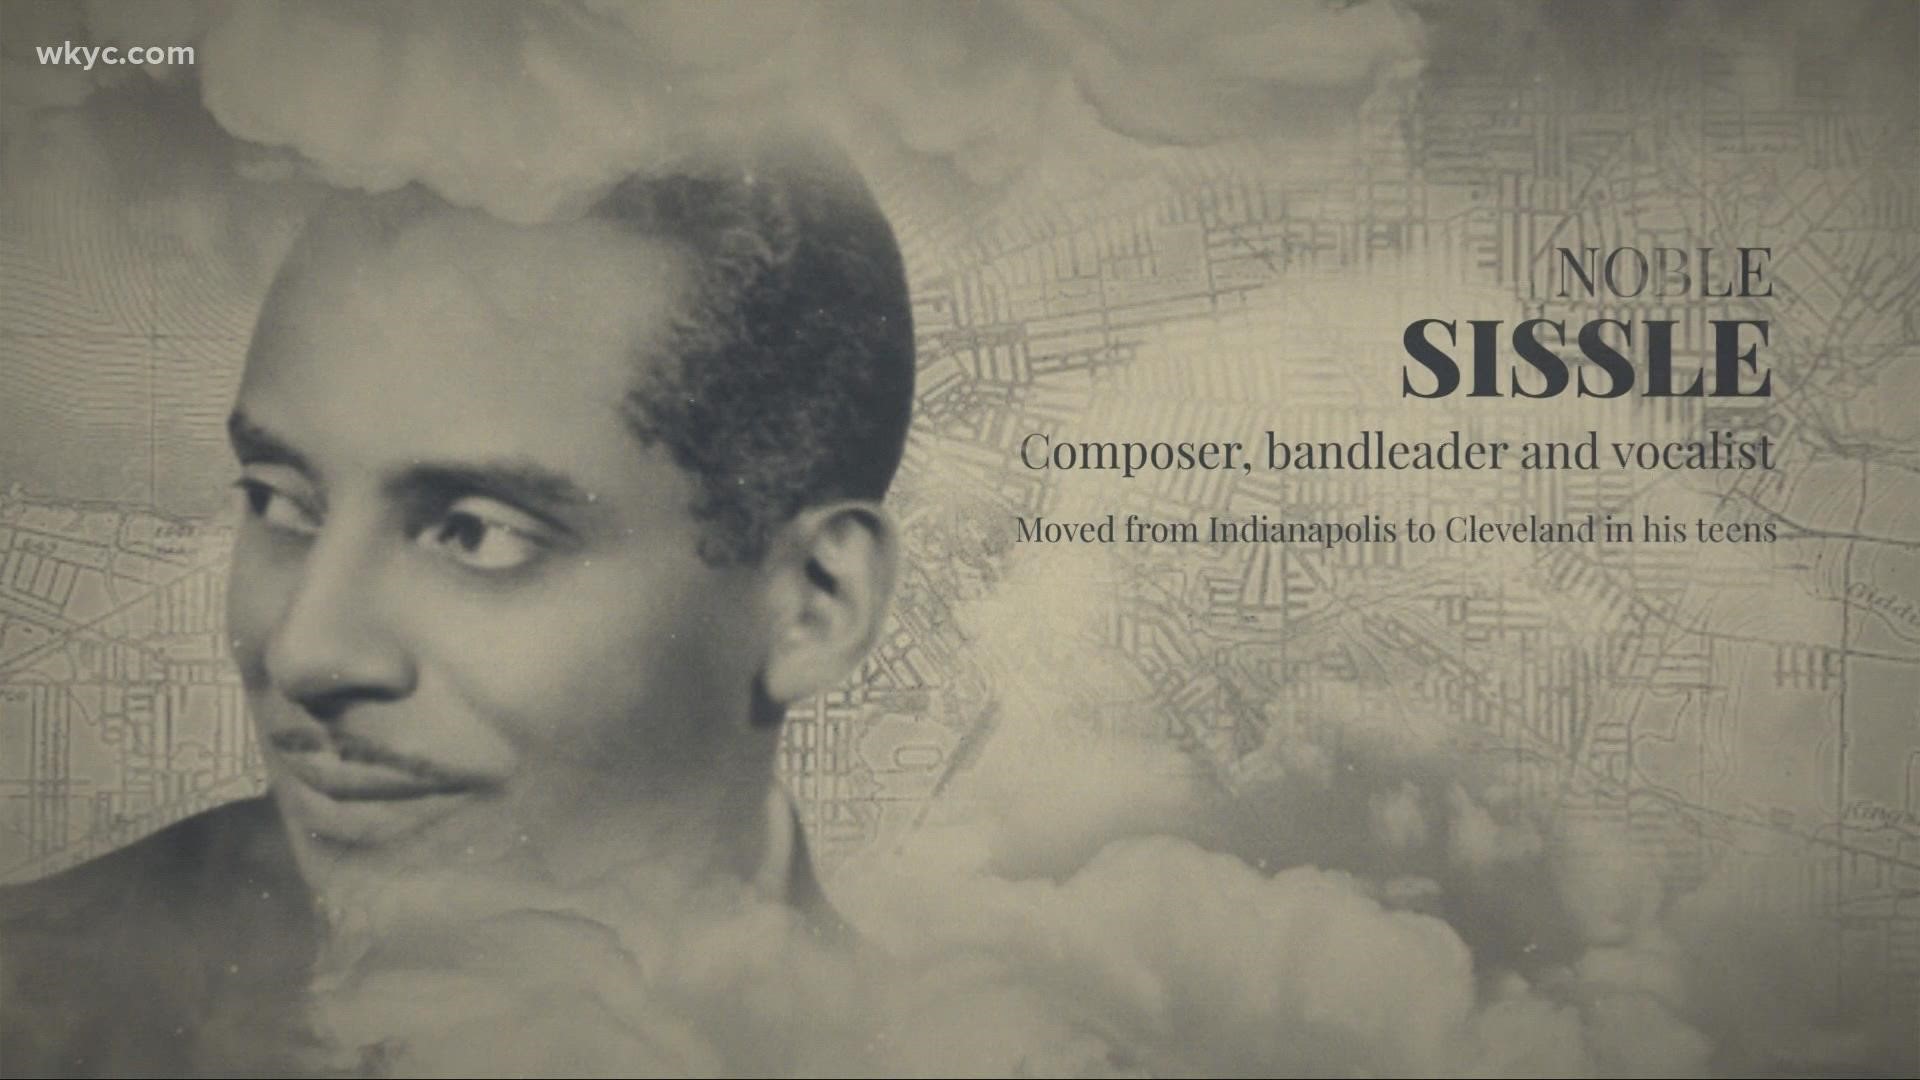 A composer with ties to Cleveland, Sissle helped shatter Broadway's color barrier.